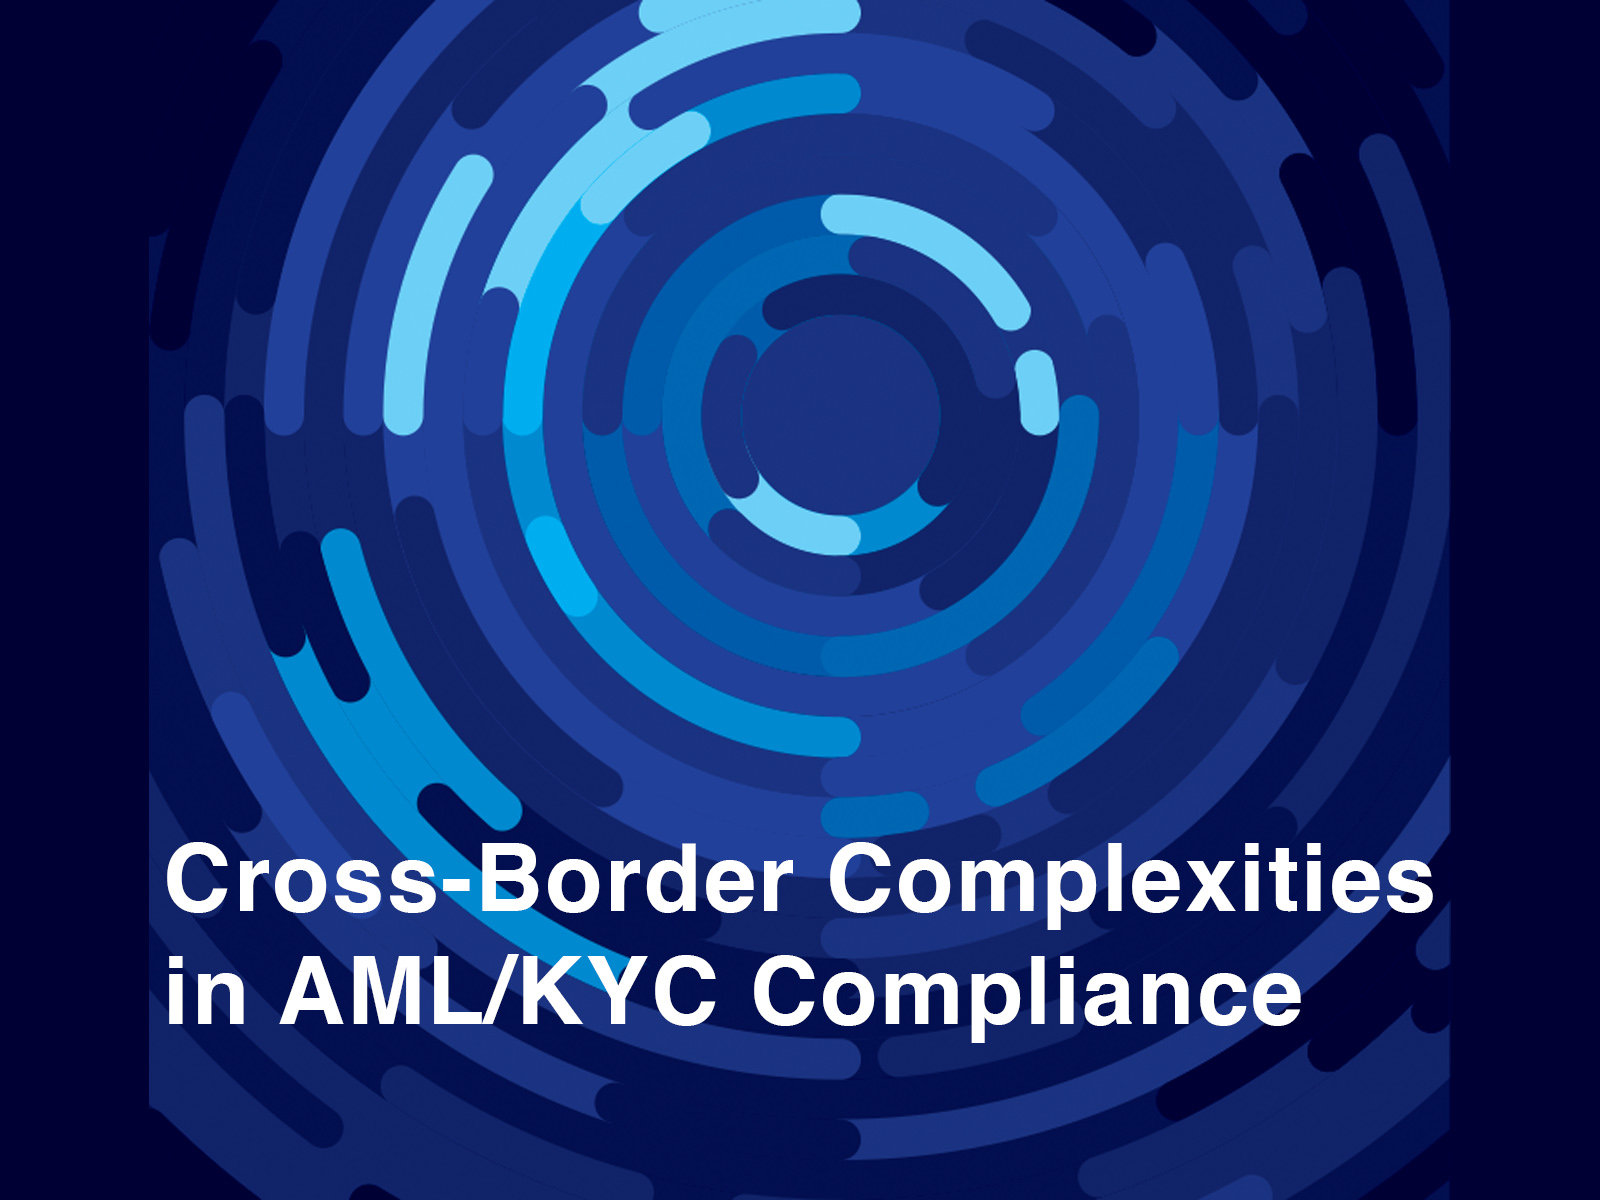 Navy background with concentric circles in shades of blue. Text: Cross border complexities in AML/KYC Compliance. Conceptual visual for story about AML Compliance and AML/KYC software solutions being beneficial to cross-border transactions tracking and monitoring.